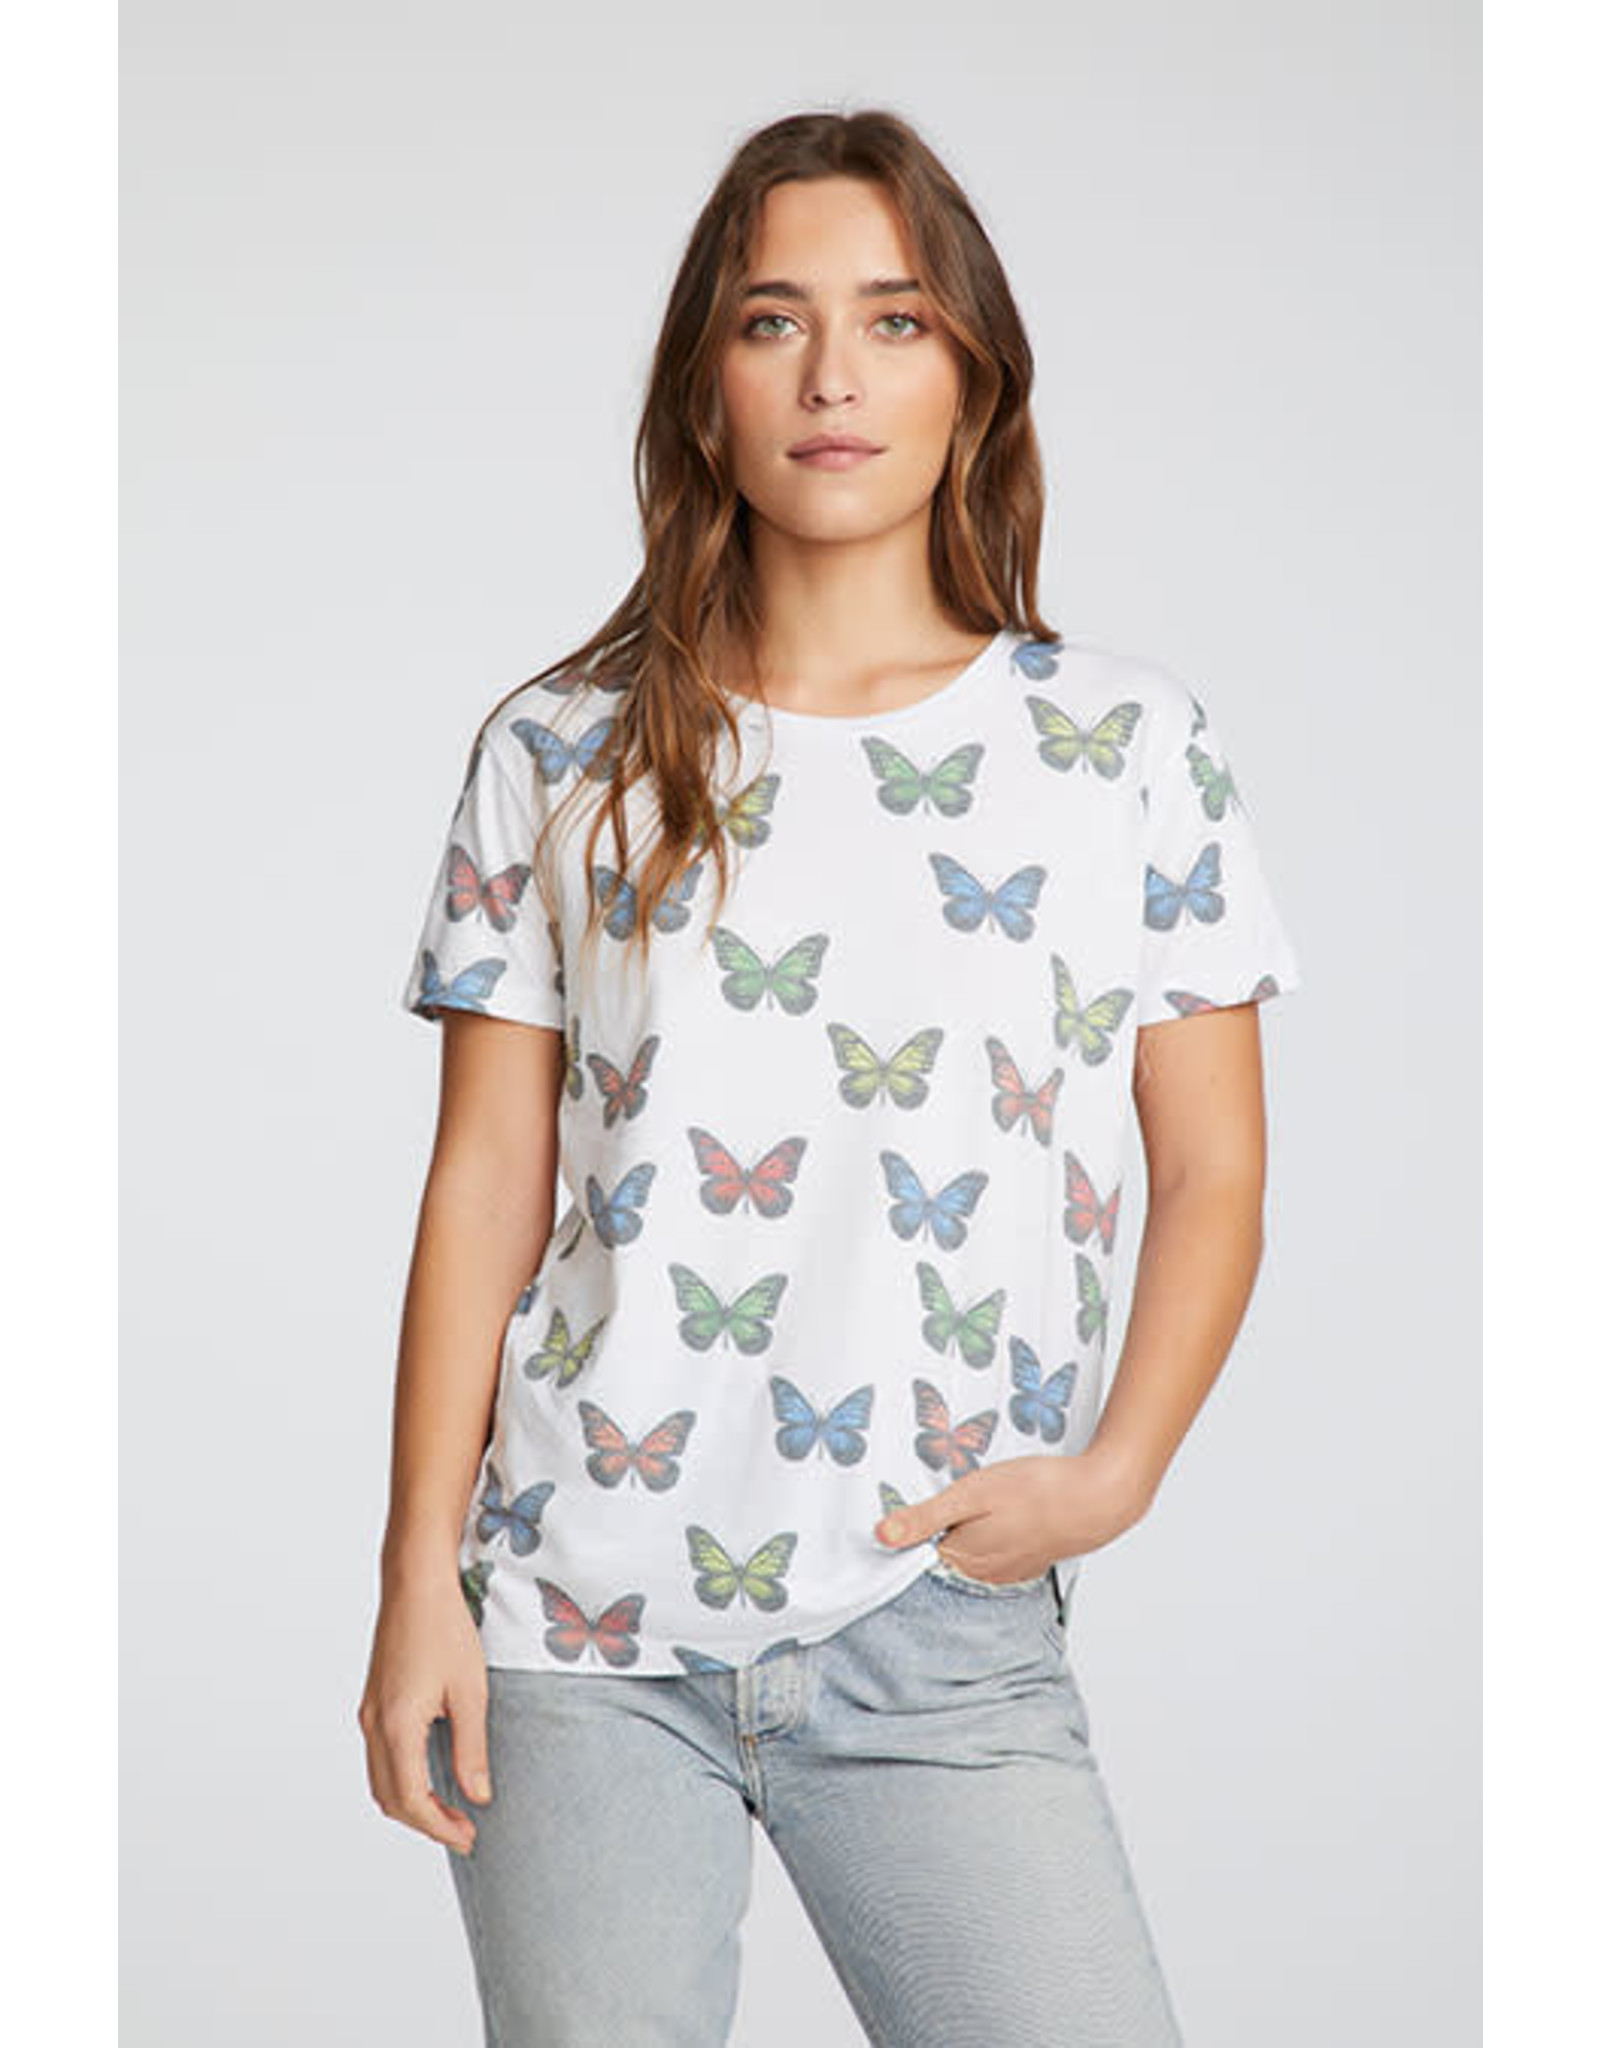 Chaser Chaser Vintage Butterfly Tee